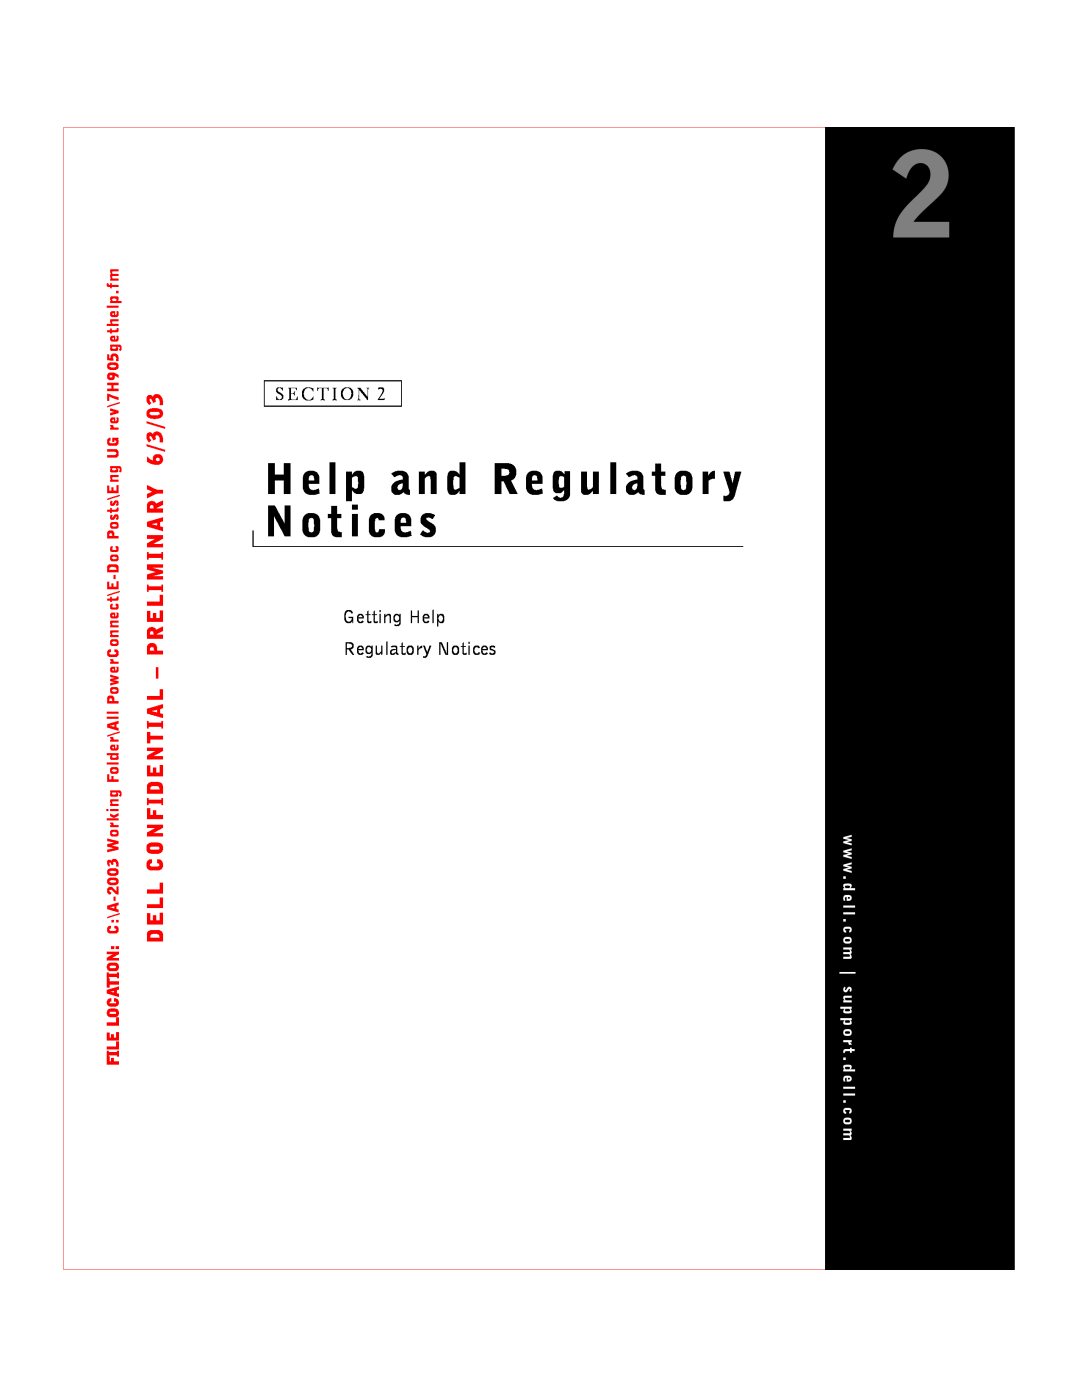 Dell 2016, 2024 Help and Regulator y Notices, Getting Help Regulatory Notices, DELL CONFIDENTIAL - PRELIMINARY 6/3/03 